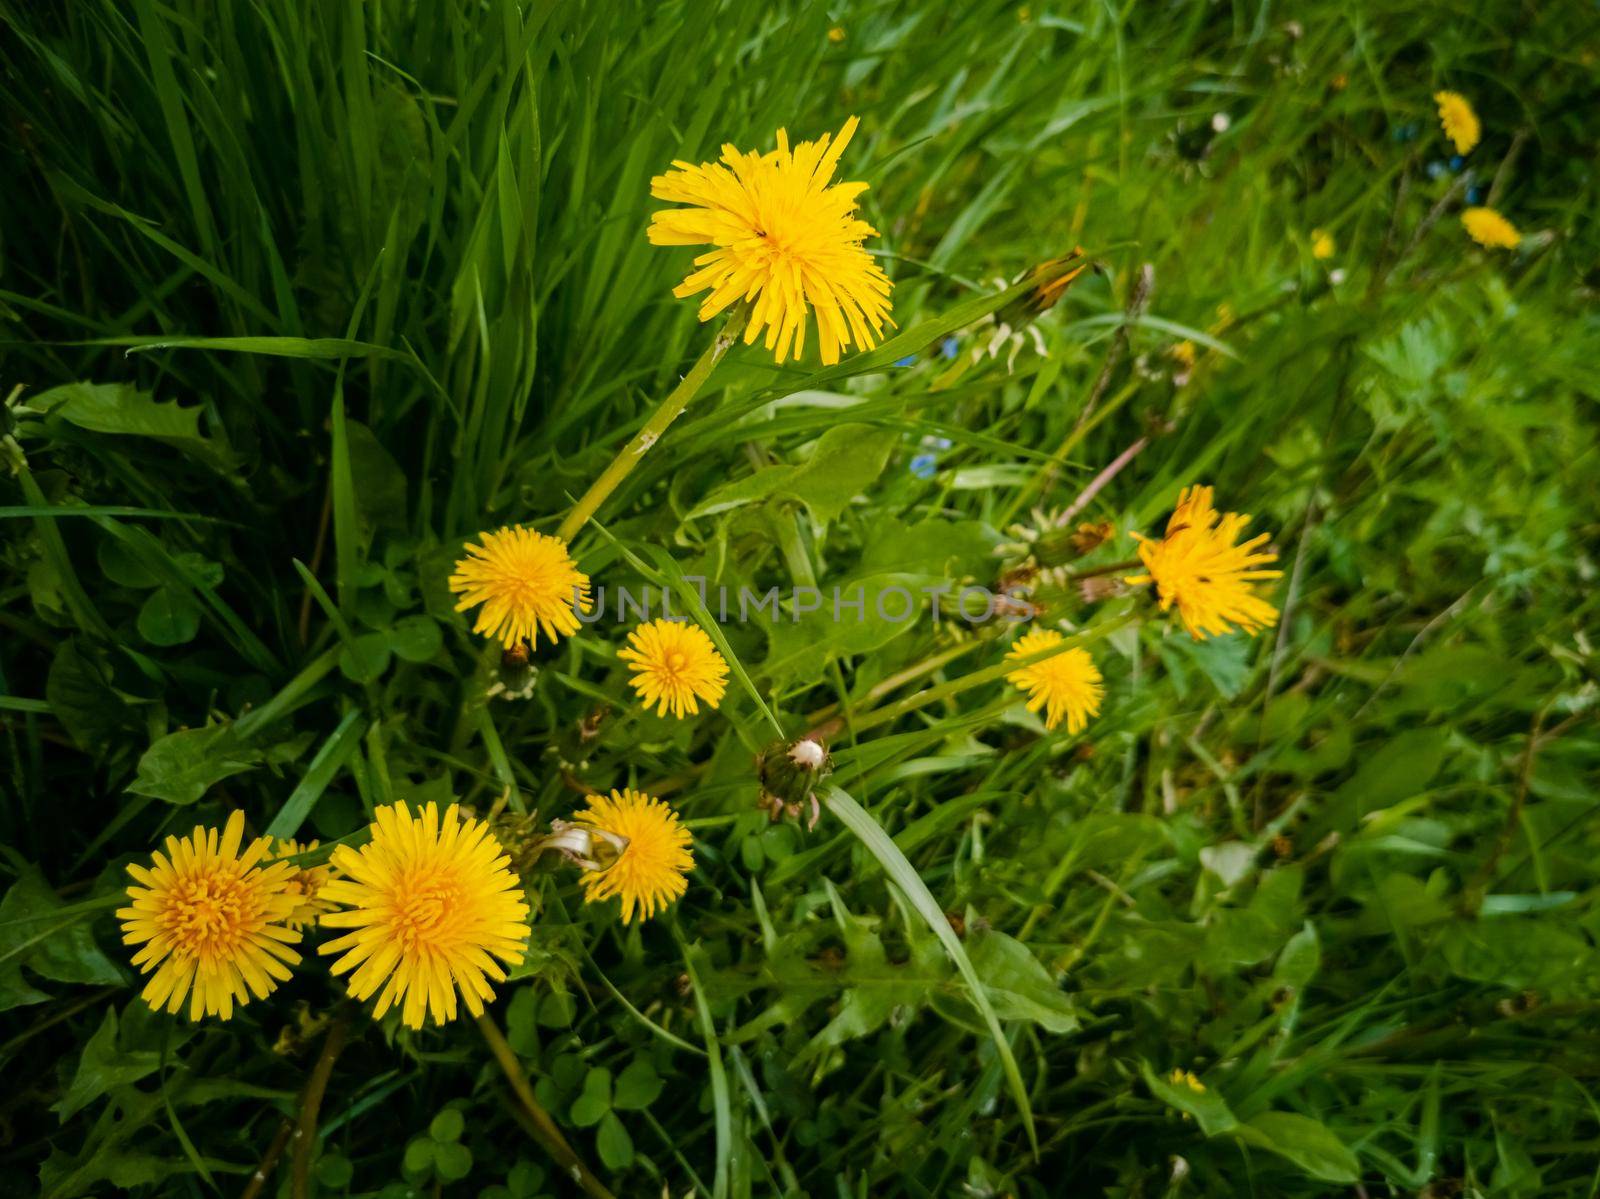 yellow blooming dandelions in green grass. close-up. beautiful summer background